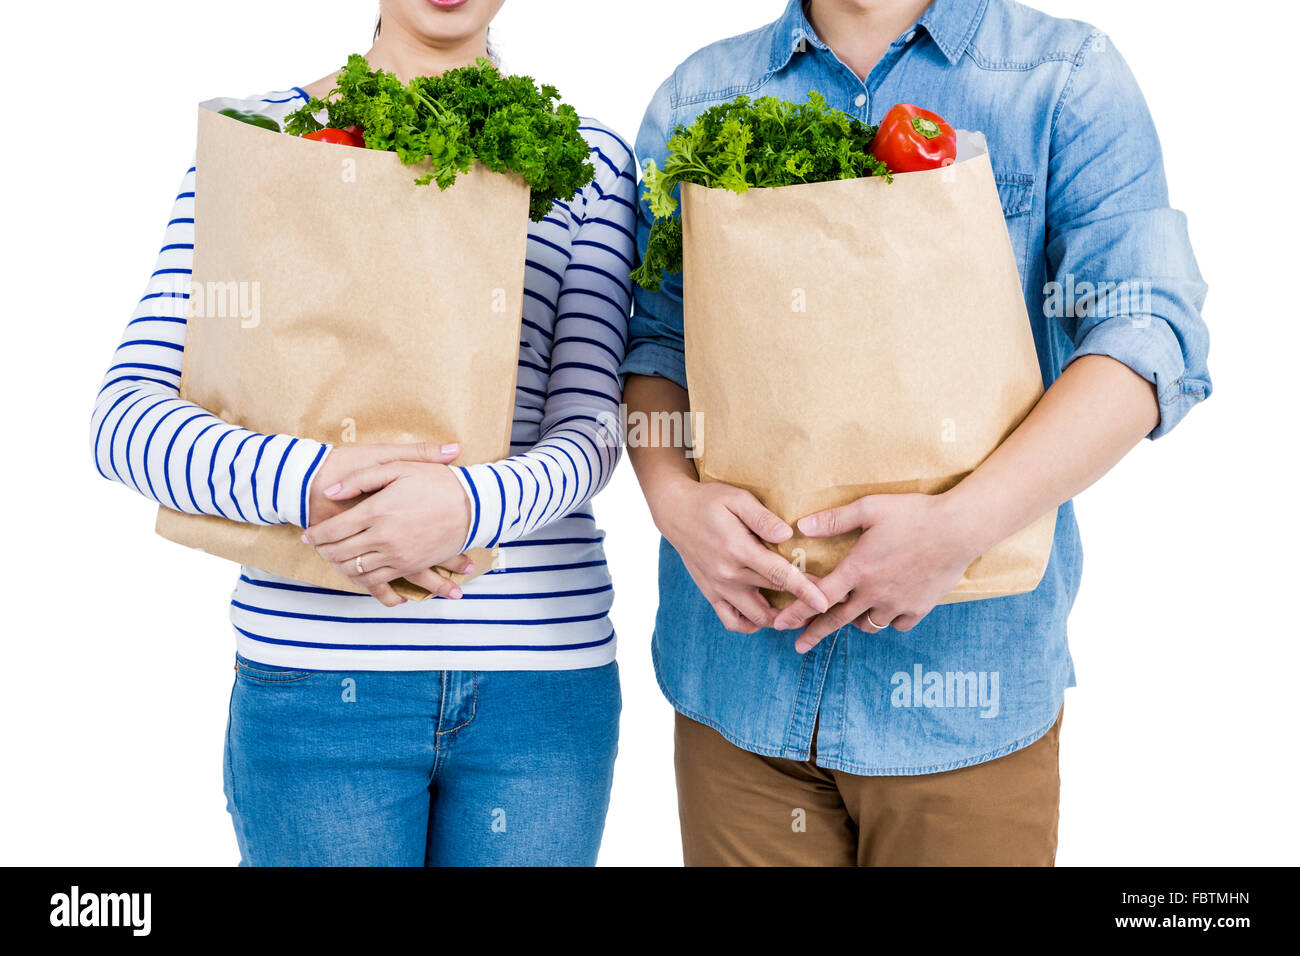 Mid section of couple holding grocery bags Banque D'Images